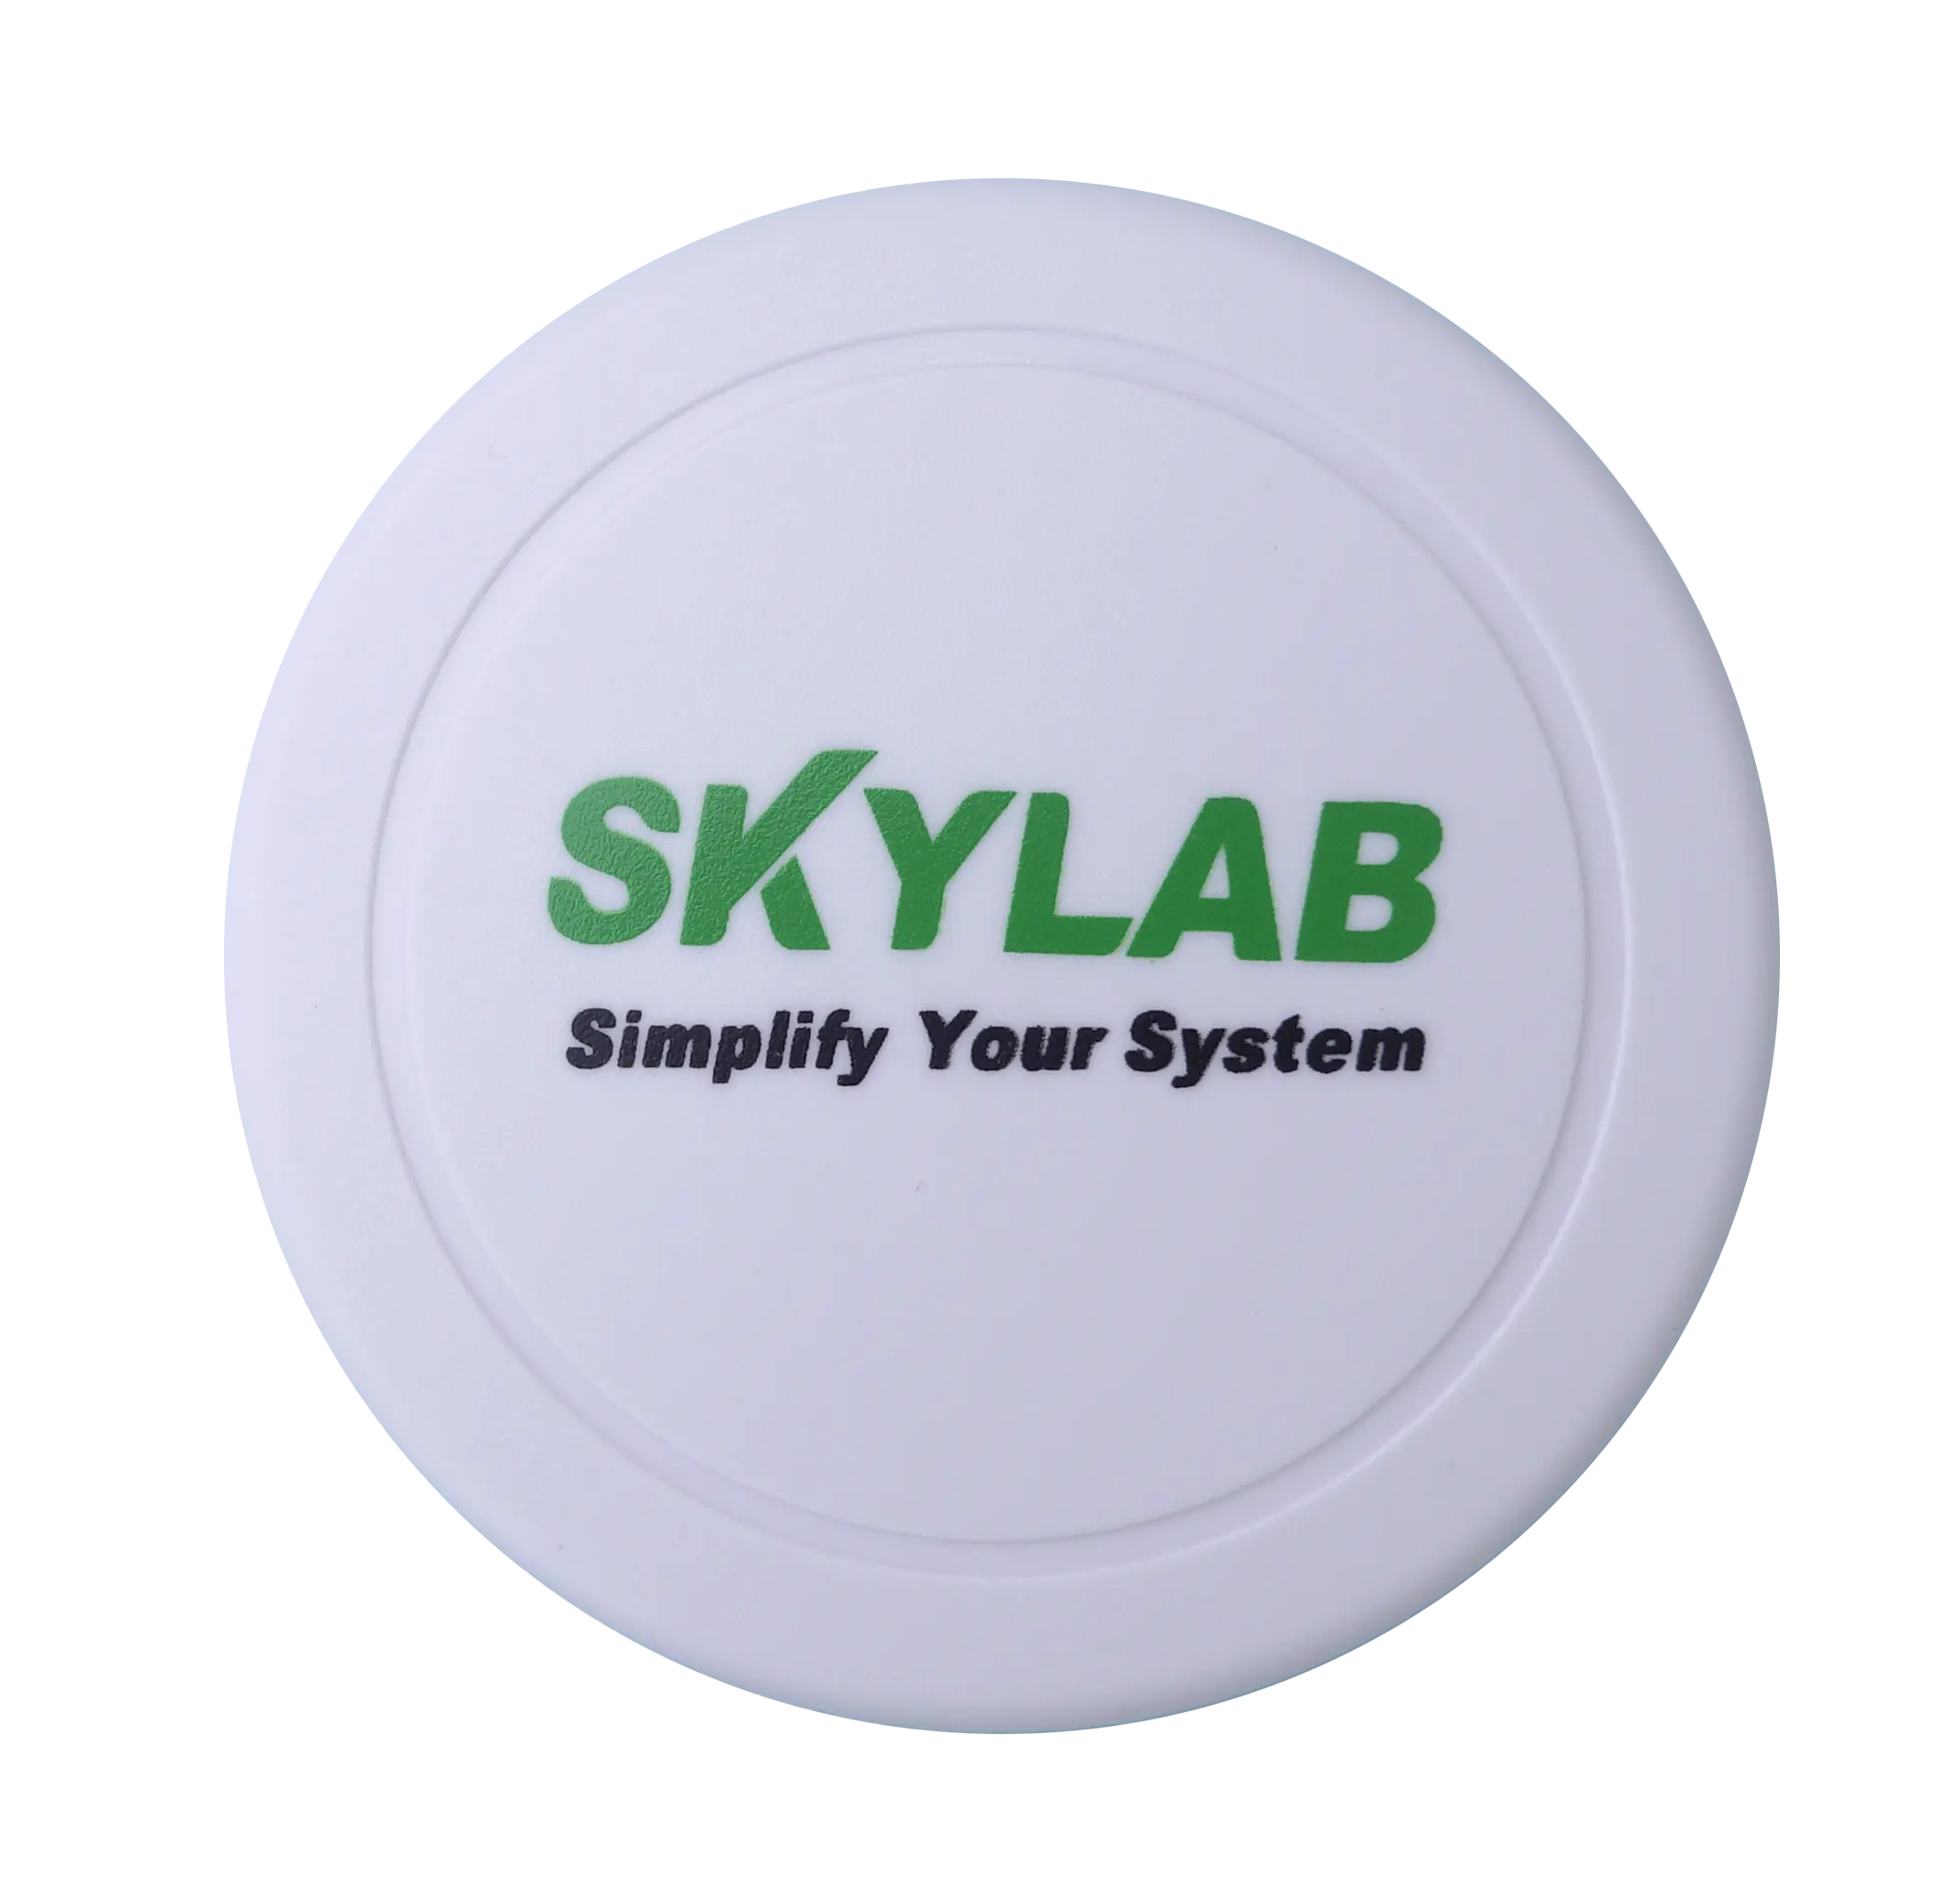 SKYLAB 50m UWB Ble Bluetooth Proximity Url Beacon With Free App And Sdk asset positioning Ibeacon tag